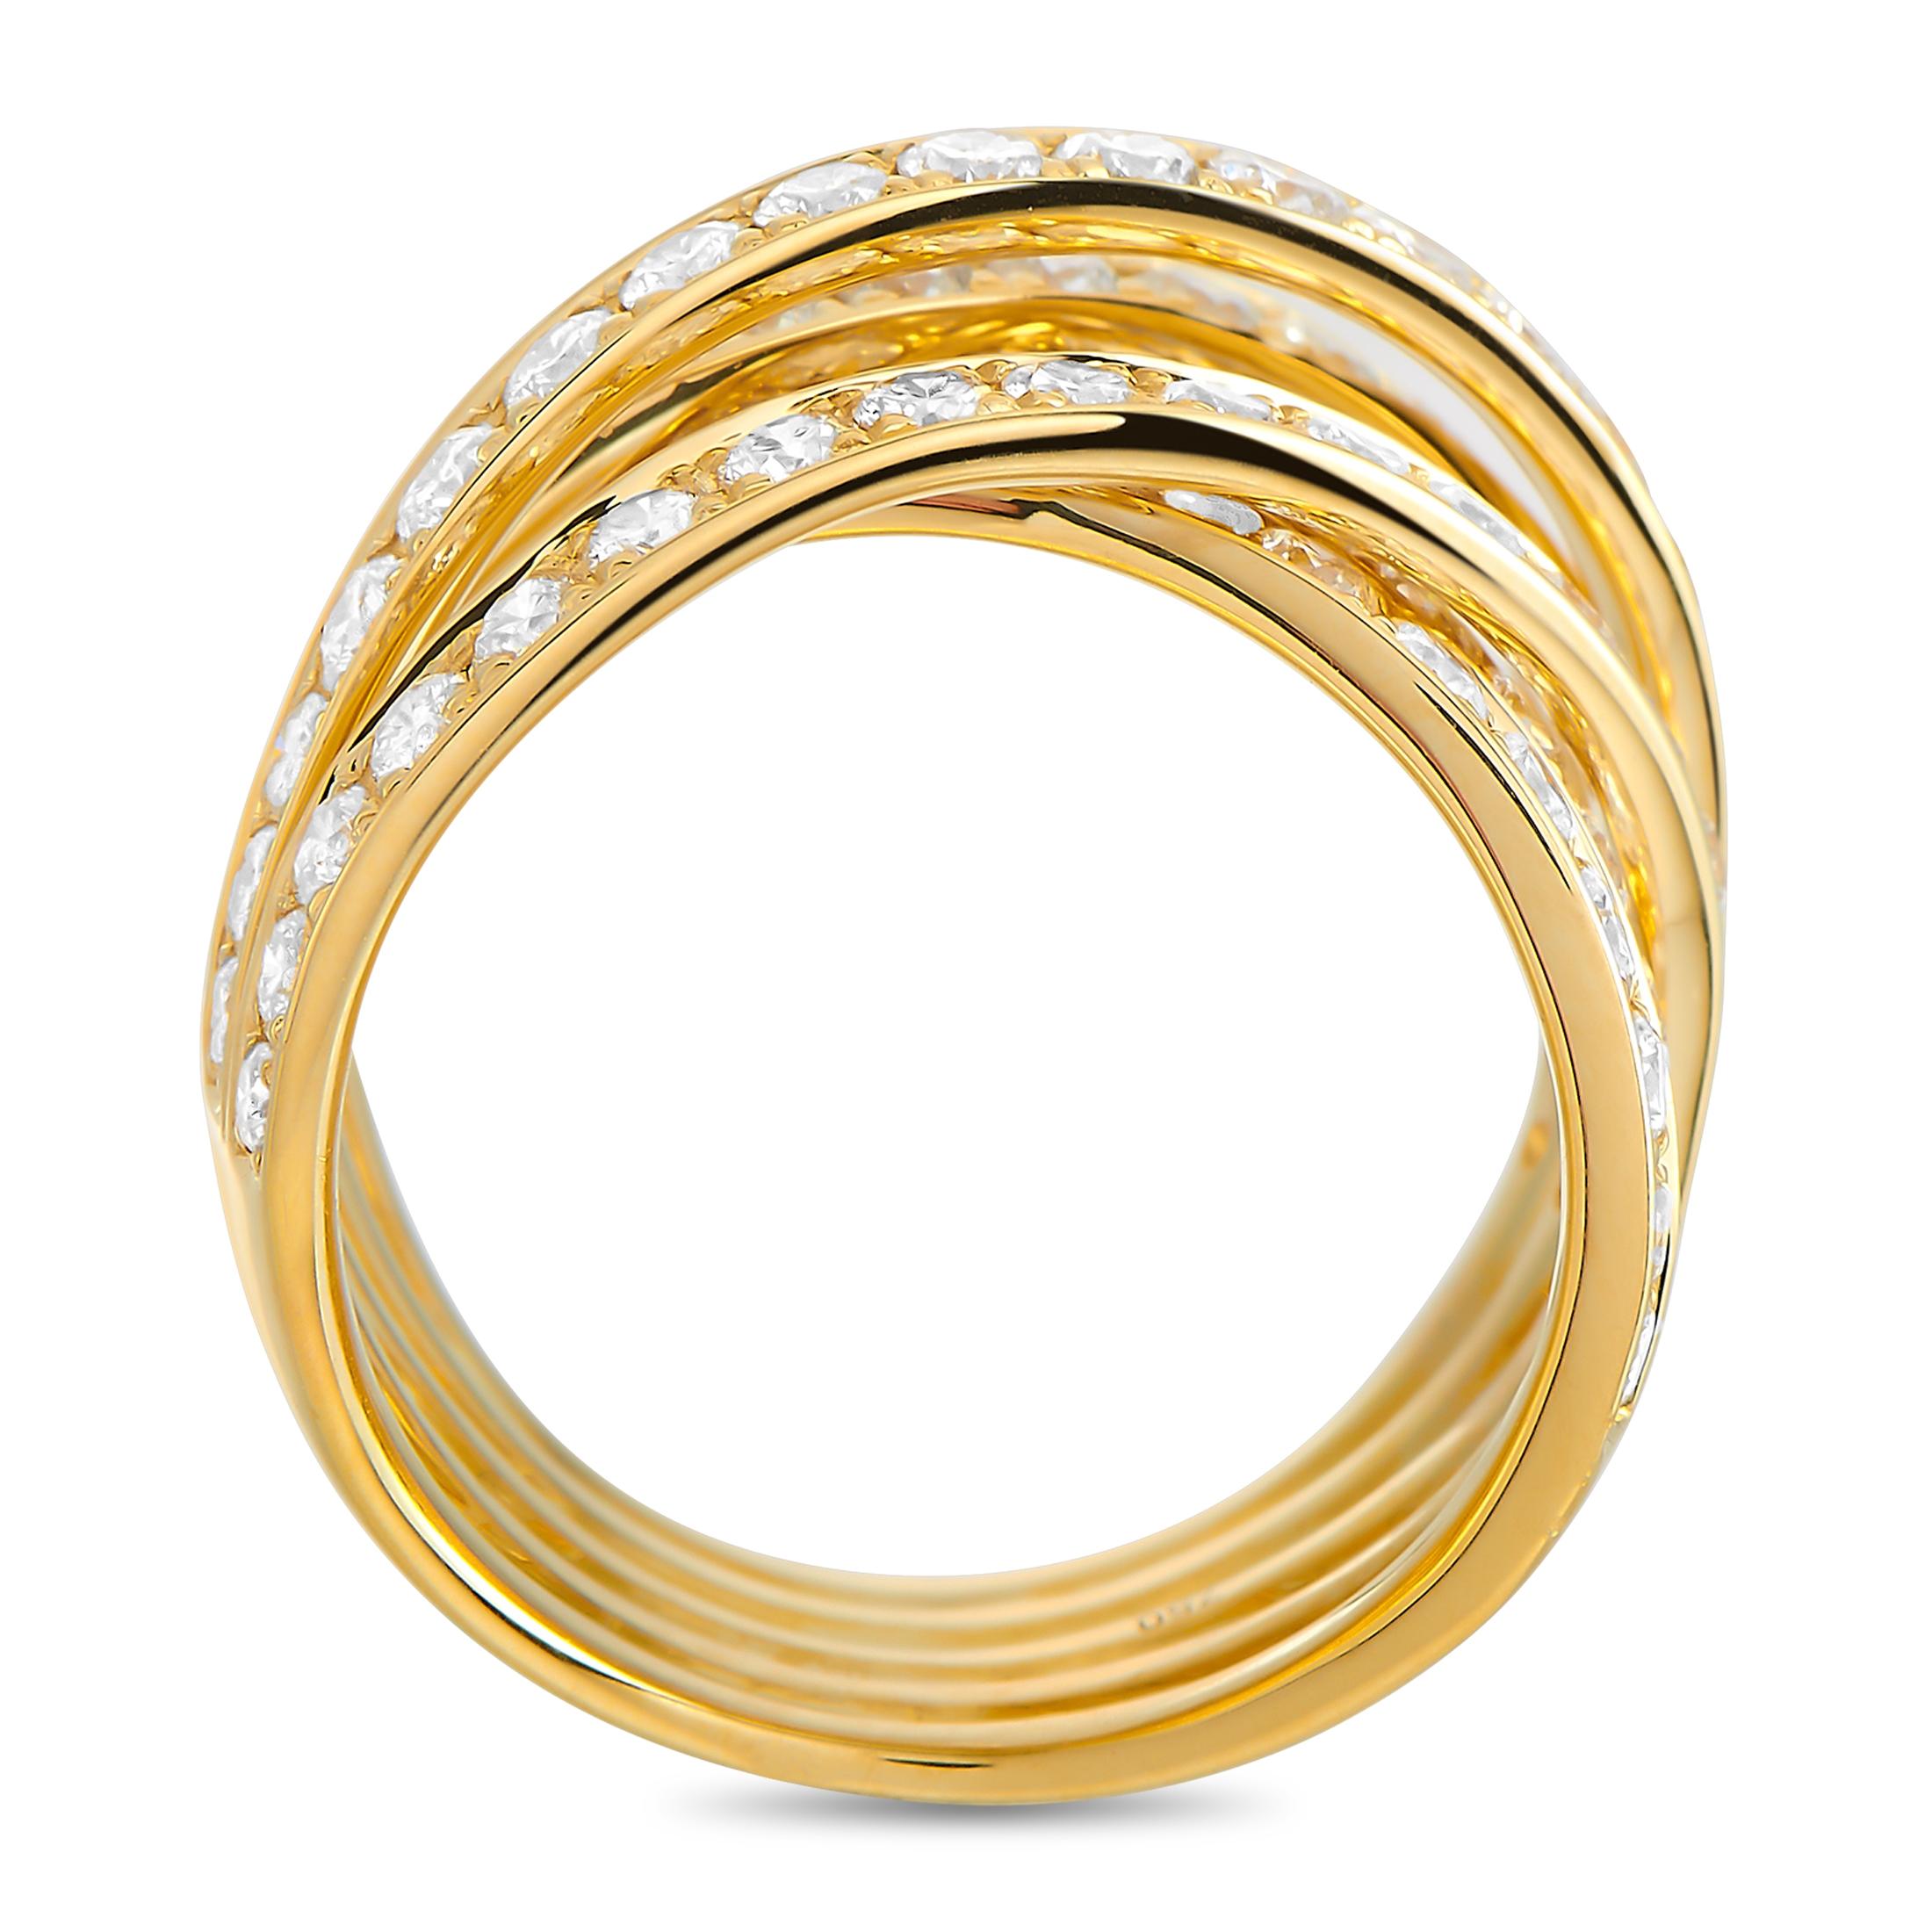 This LB Exclusive 18K Yellow Gold 2.75 ct Diamond Crossover Ring displays a fancy twist to the stylish ring stack. Crafted in 18K yellow gold is this single wide-band ring measuring 11mm thick. The ring's top dimensions measure 11mm by 20mm. The